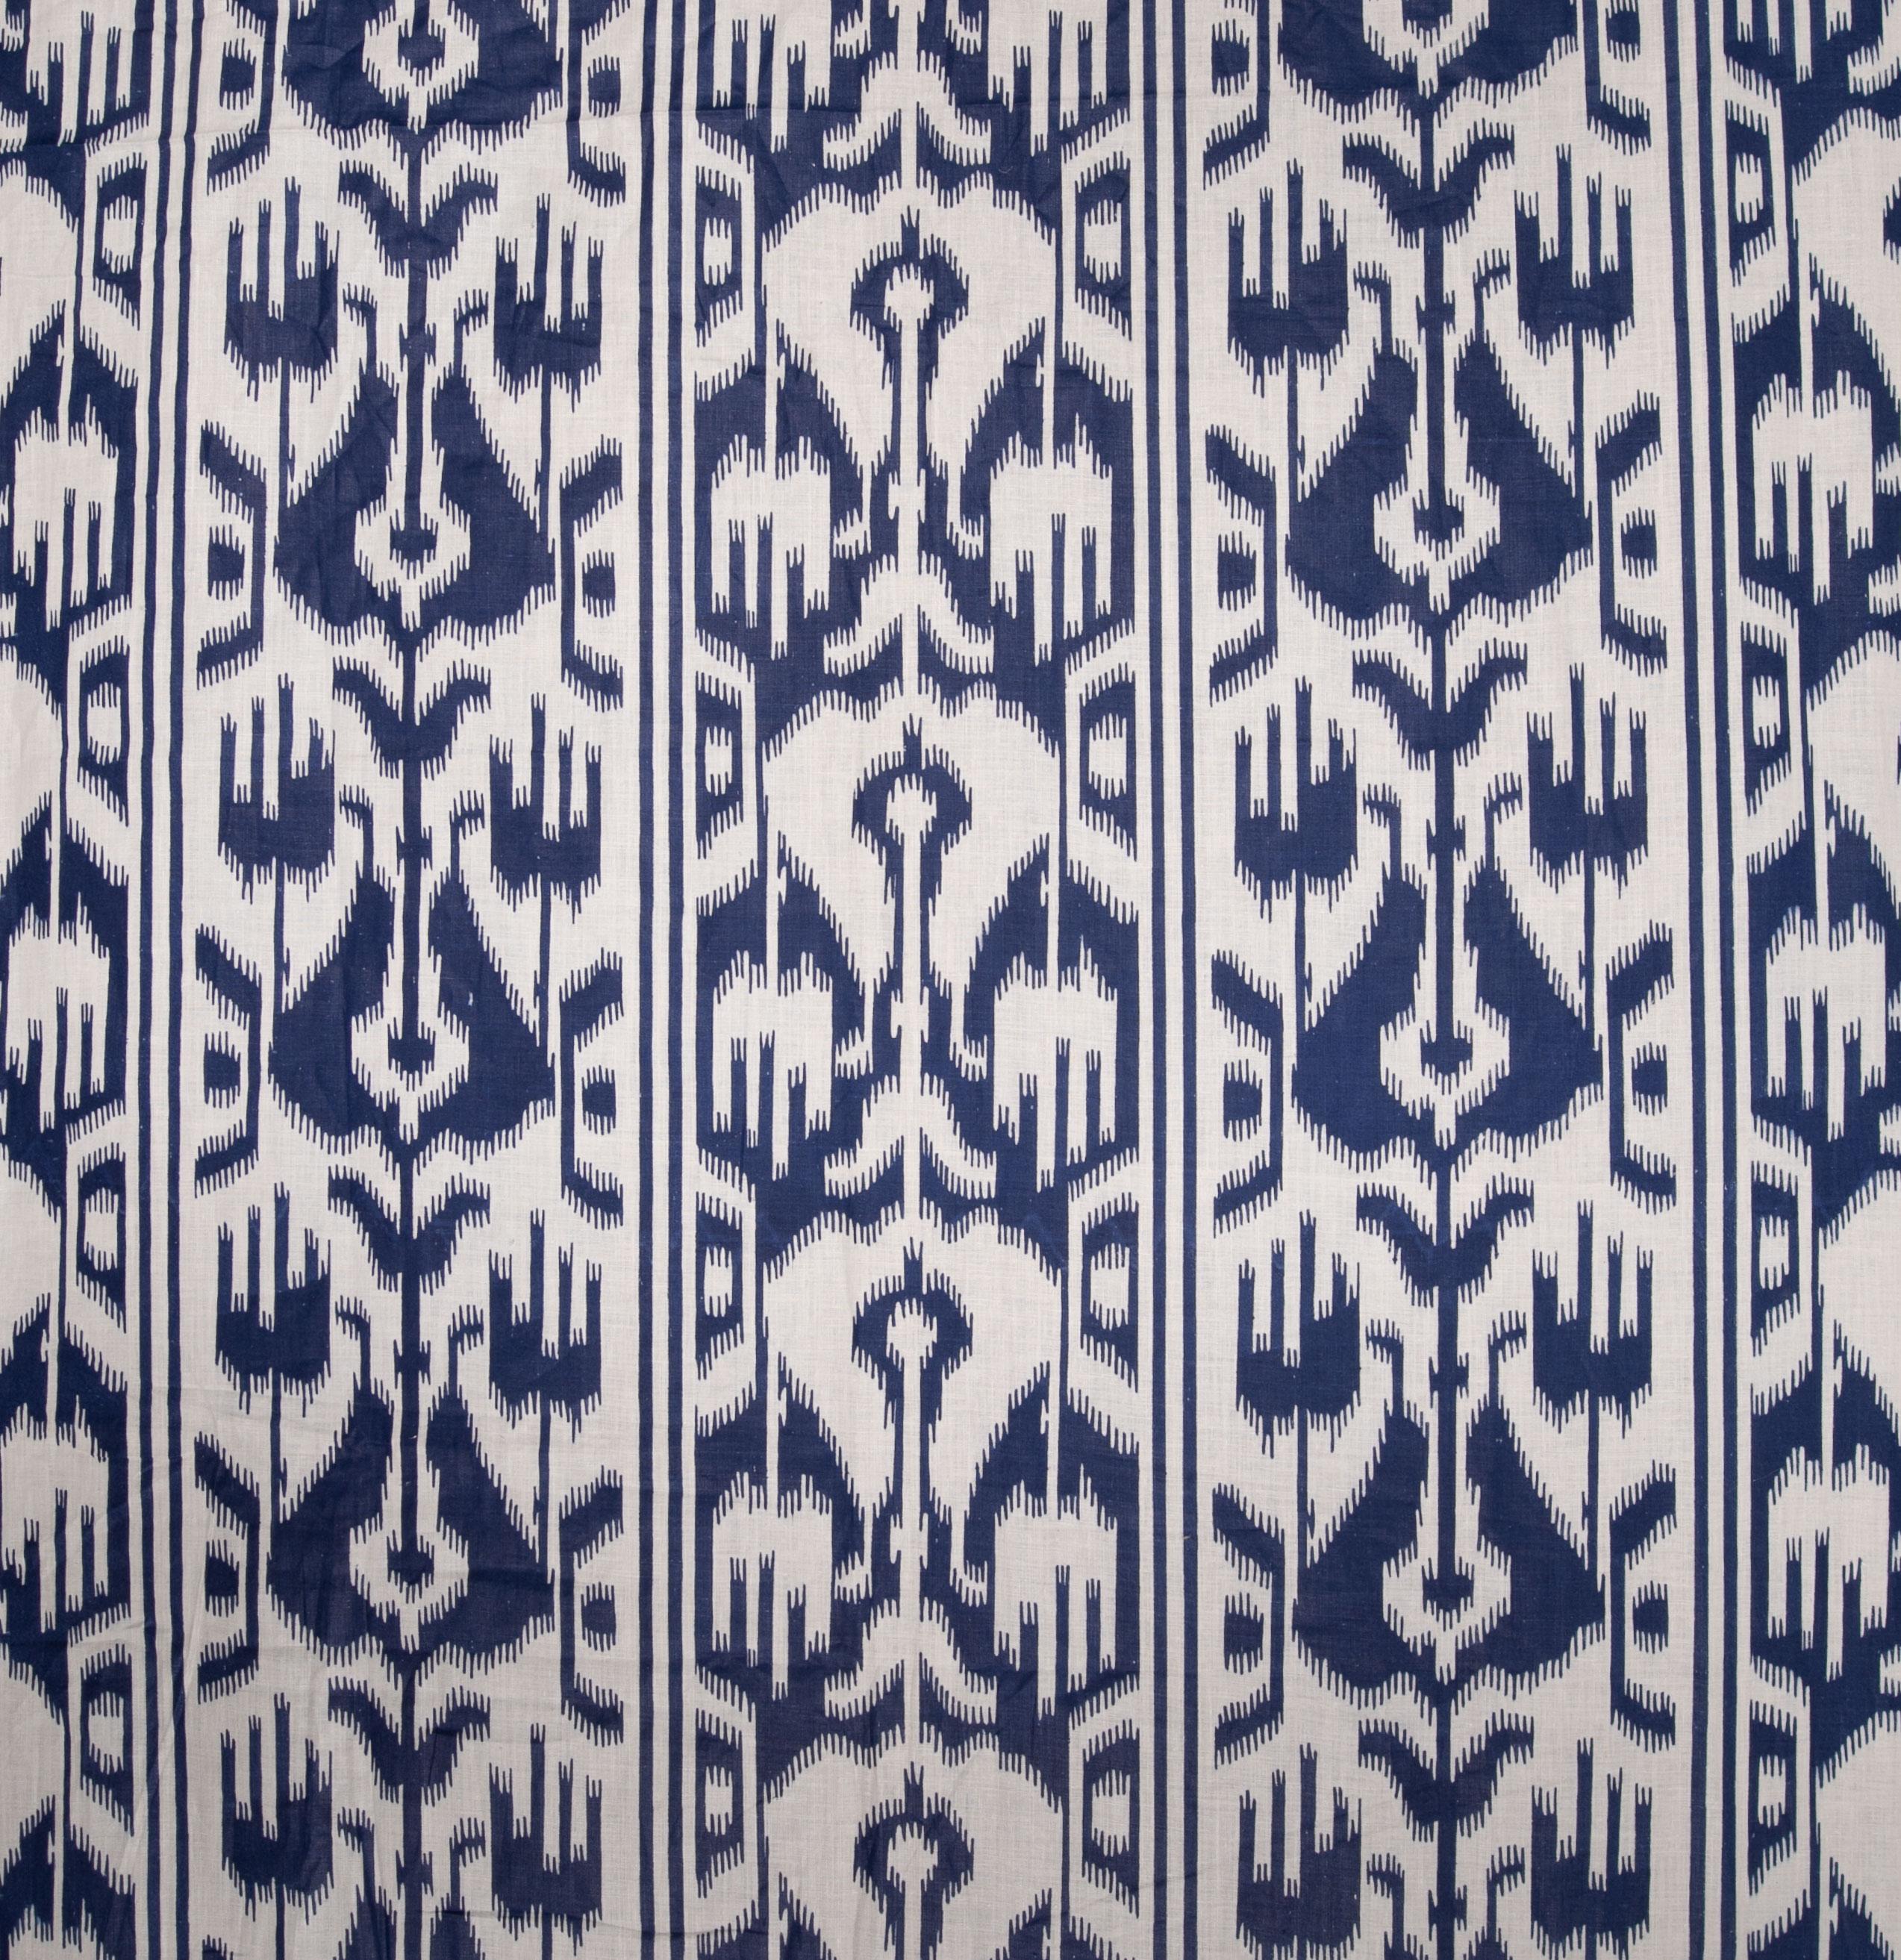 Russian Printed Ikat Design Cotton Fabric Panel, Mid-20th Century or Earlier For Sale 2